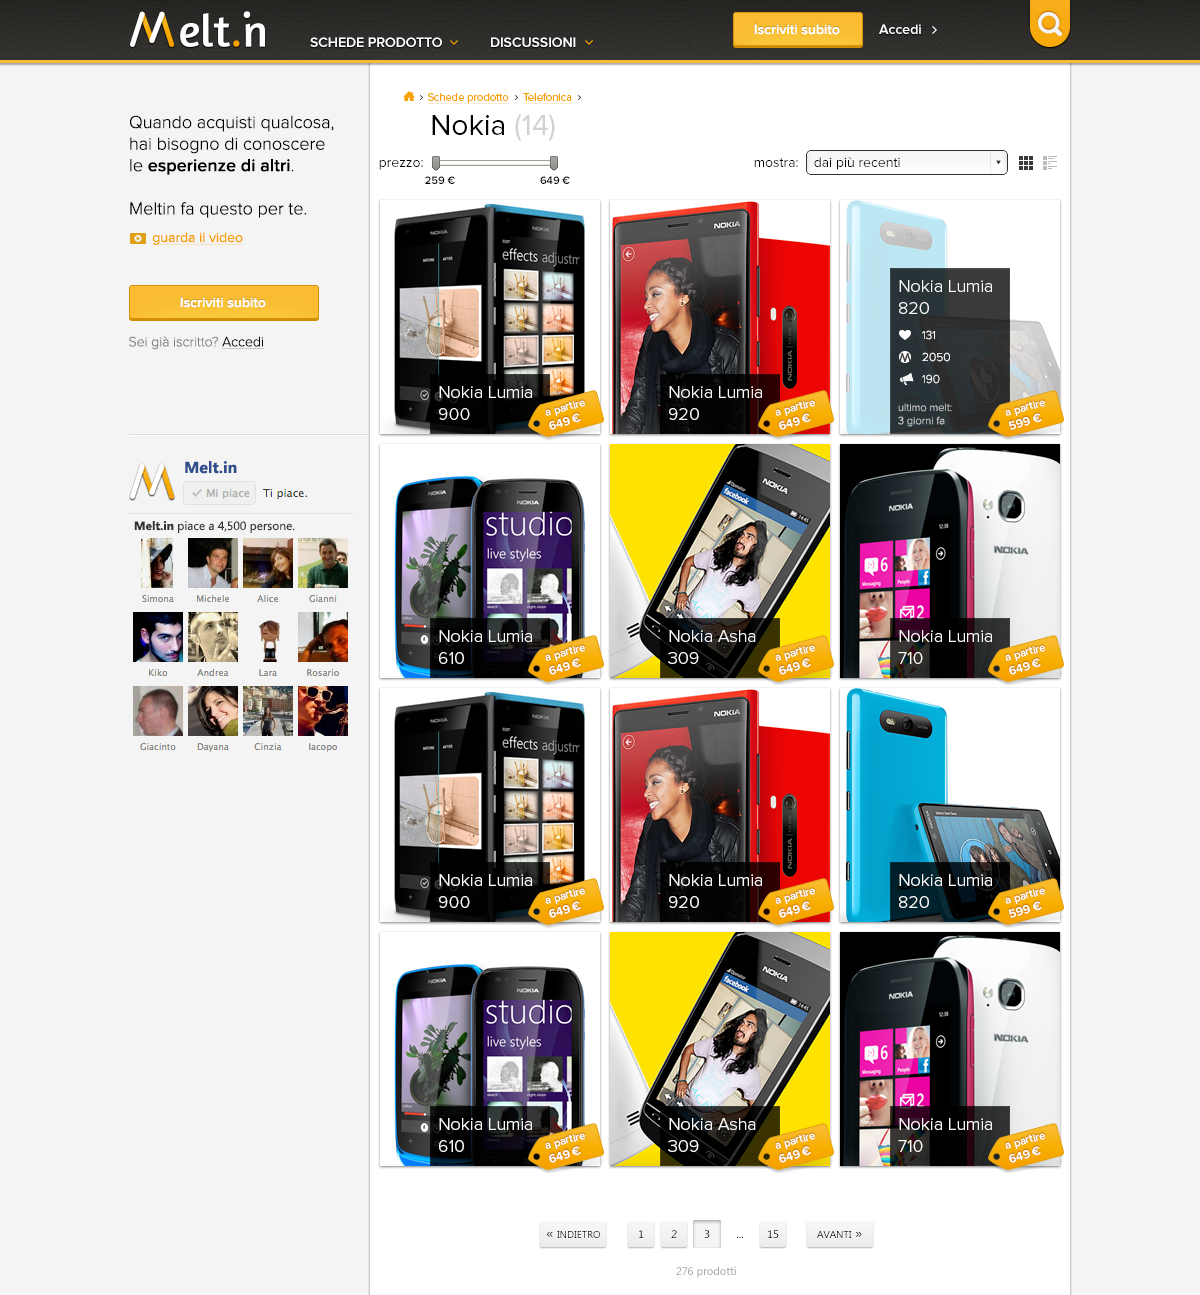 meltin Melt IN UI user interface user experience interaction directory Web design